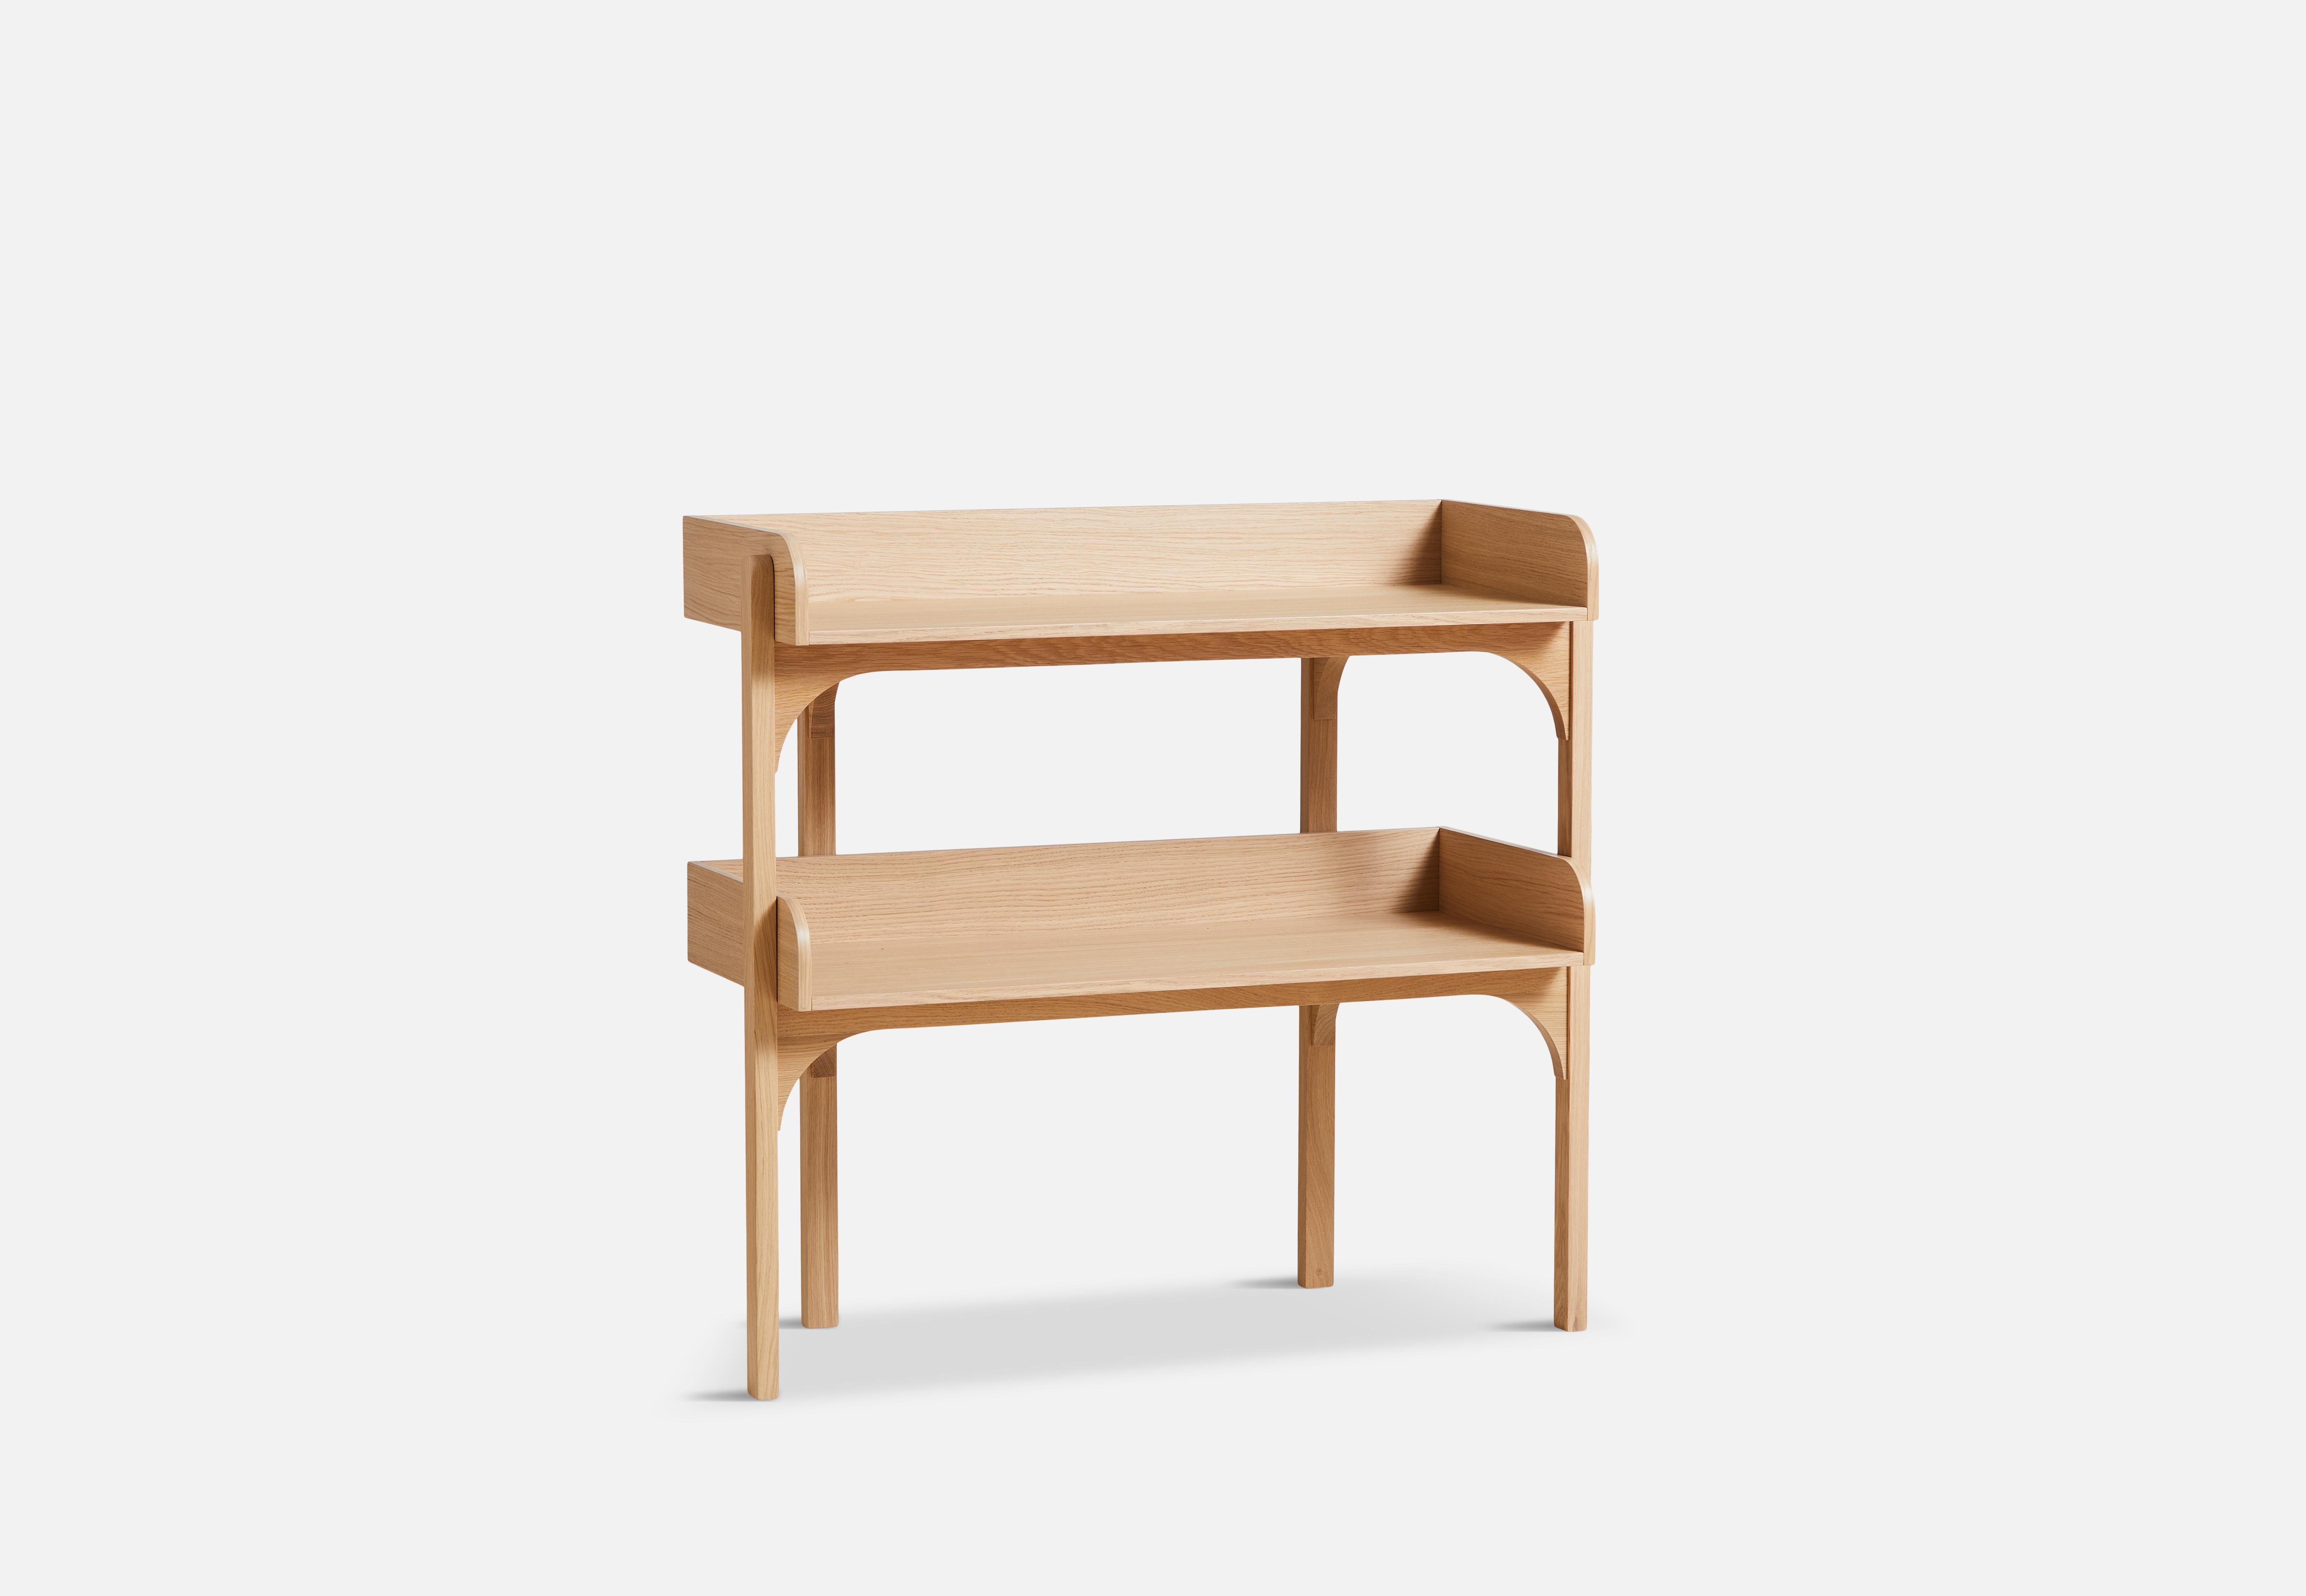 White Oak utility shelf by Rachael Heritage
Materials: Oak
Dimensions: D 63.5 x W 84.5 x H 82.5 cm
Also available in different colors and materials.

The founders, Mia and Torben Koed, decided to put their 30 years of experience into a new